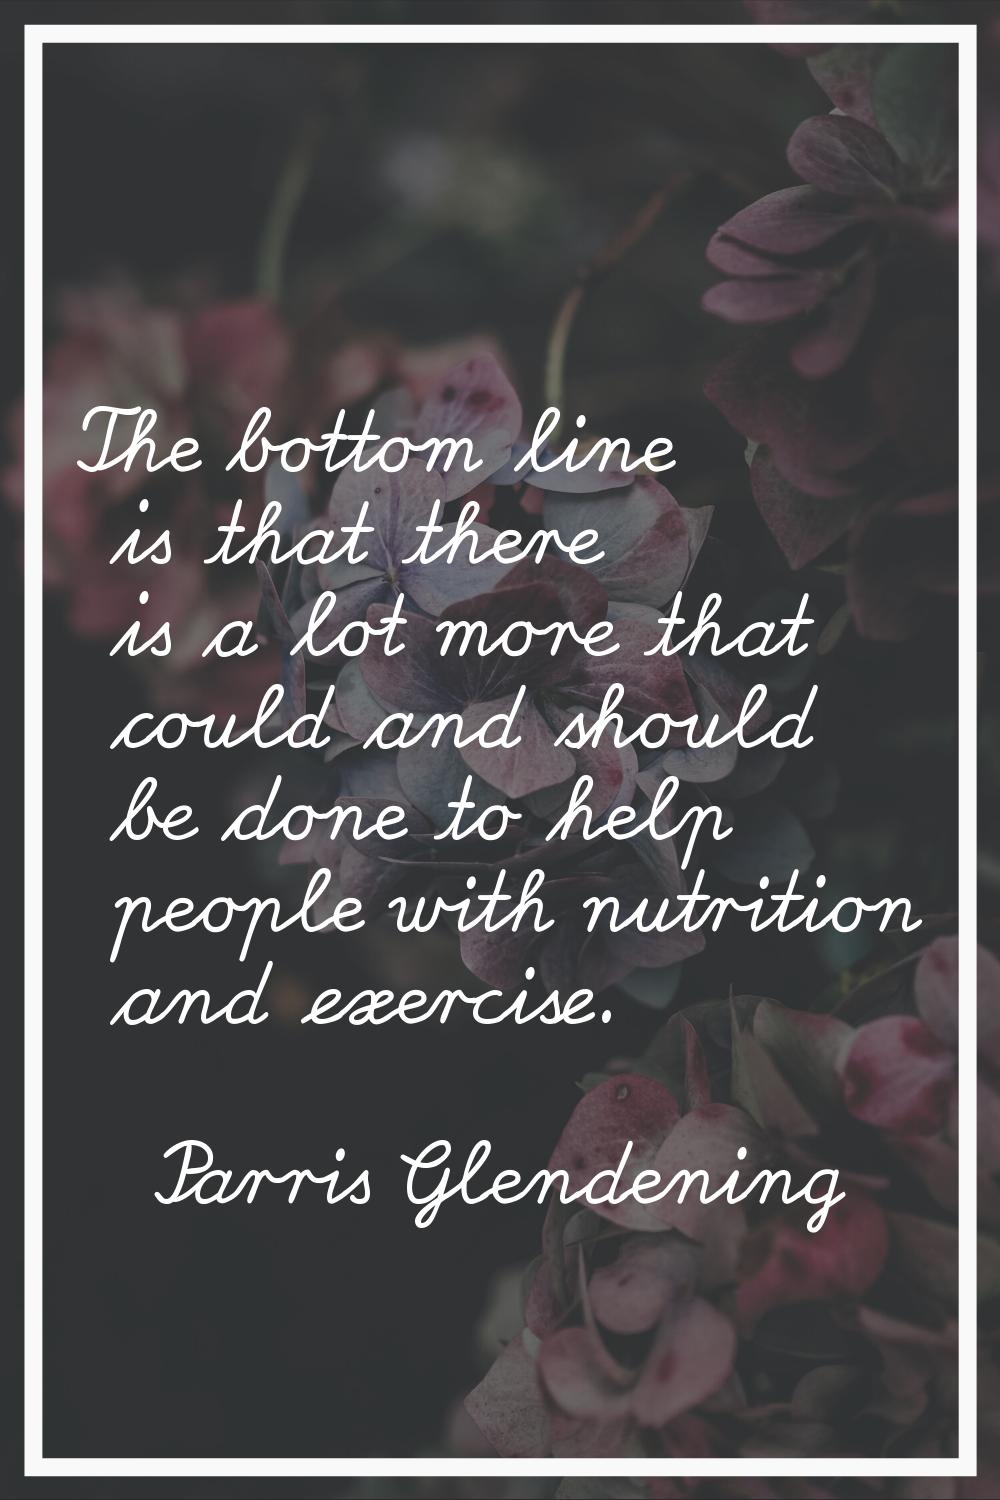 The bottom line is that there is a lot more that could and should be done to help people with nutri